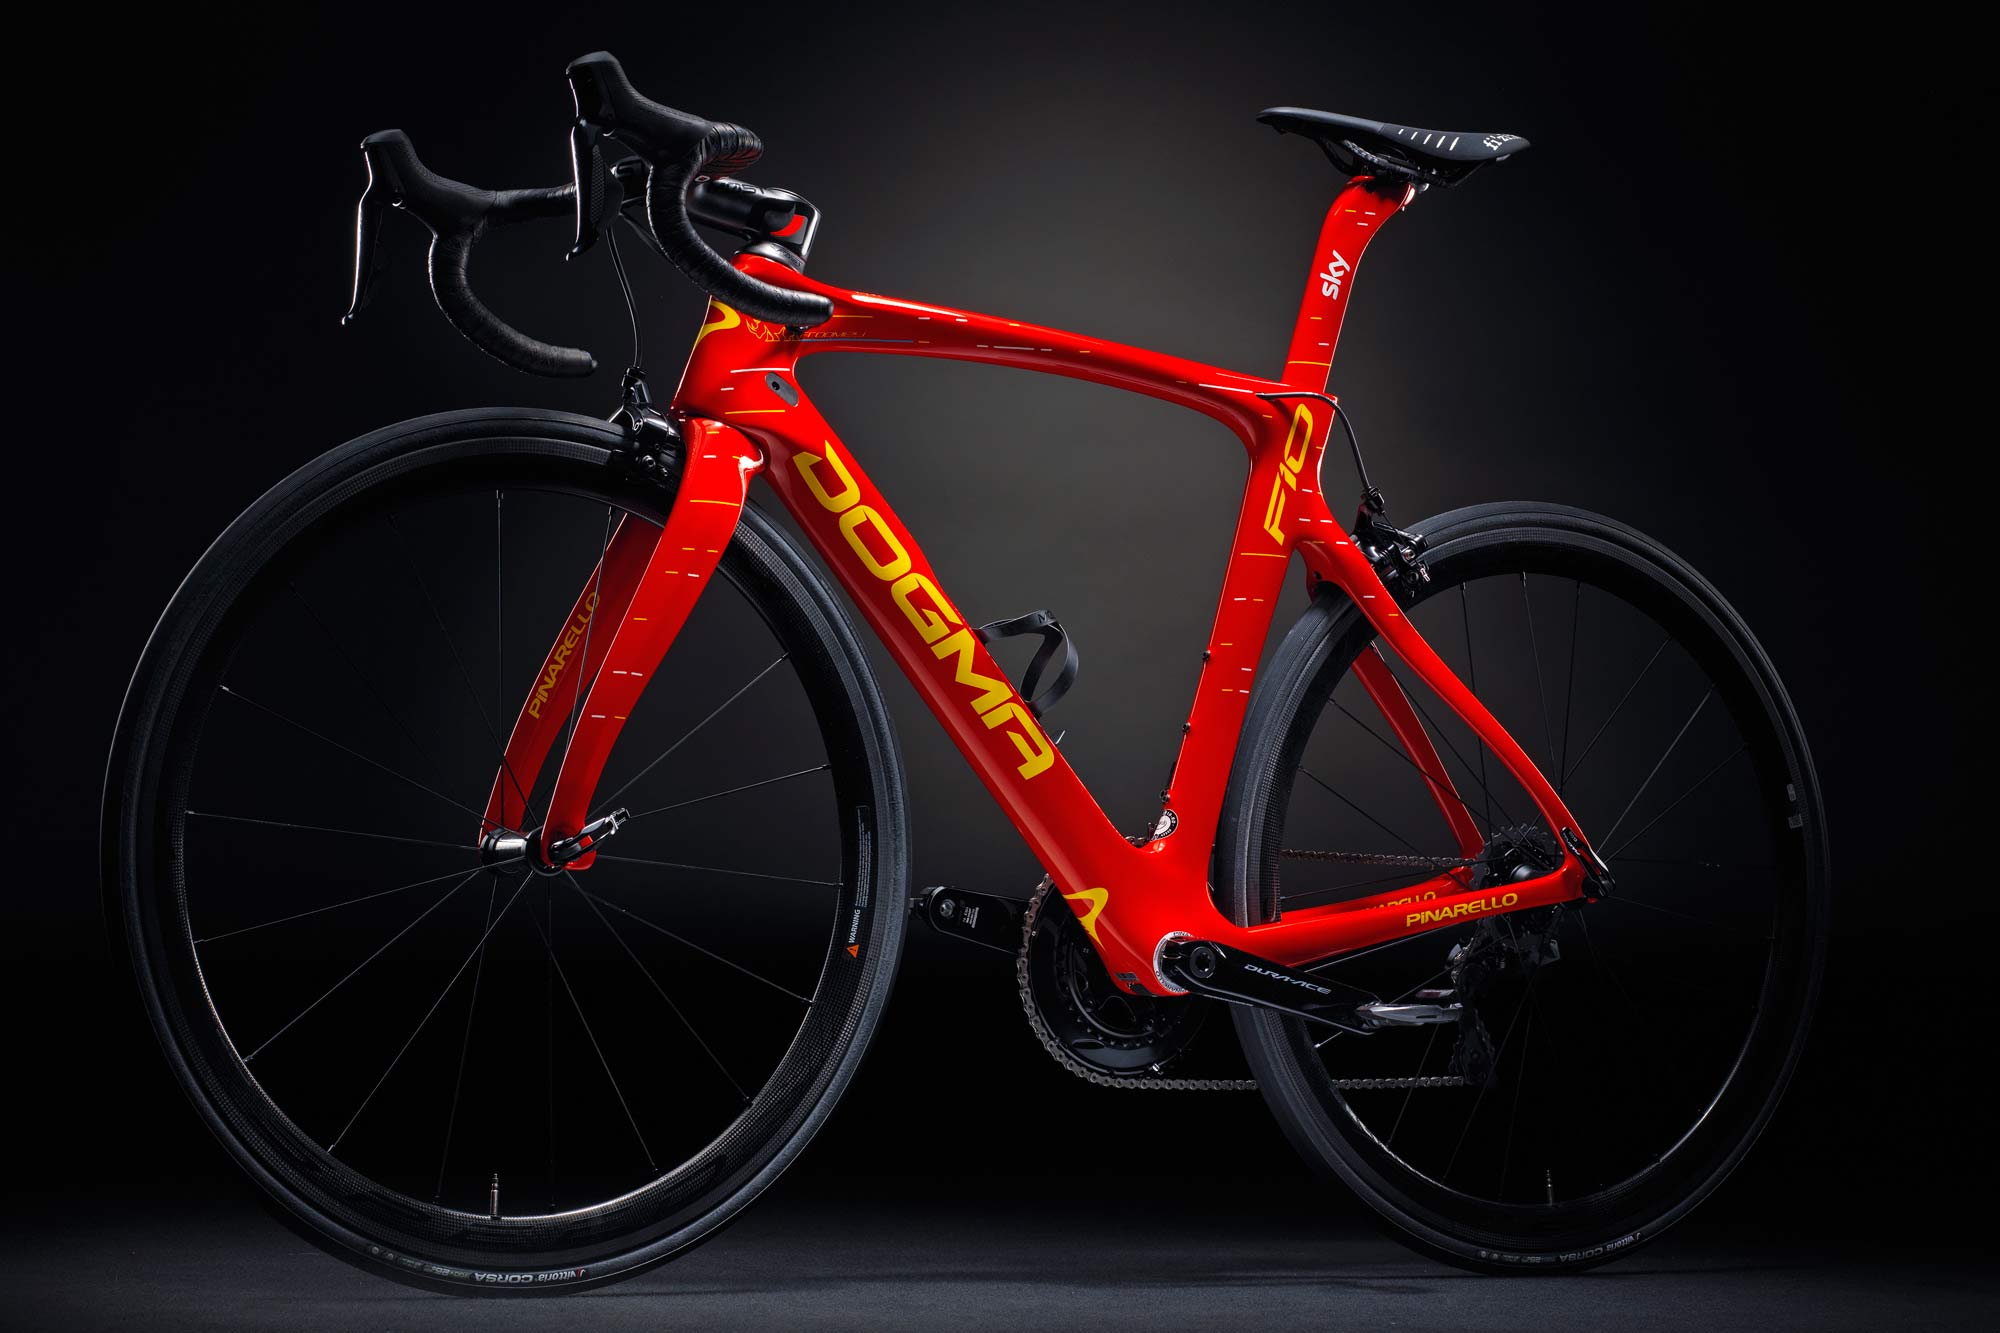 Ride like a King of Spain on Chris Froome’s limited edition Pinarello Dogma F10